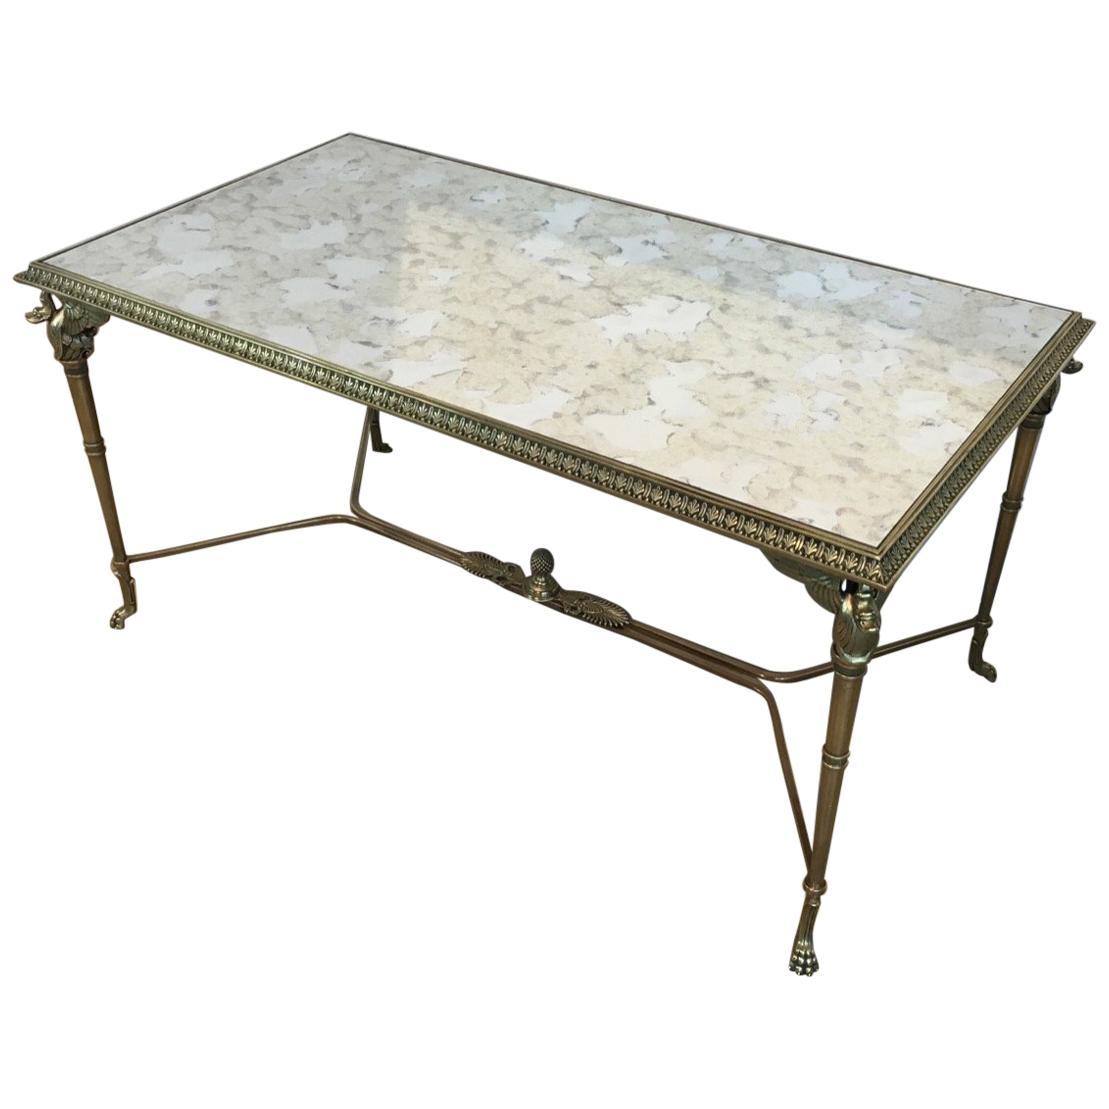 Neoclassical Bronze and Brass Coffee Table with Swanheads & Faux-Antique Mirrors